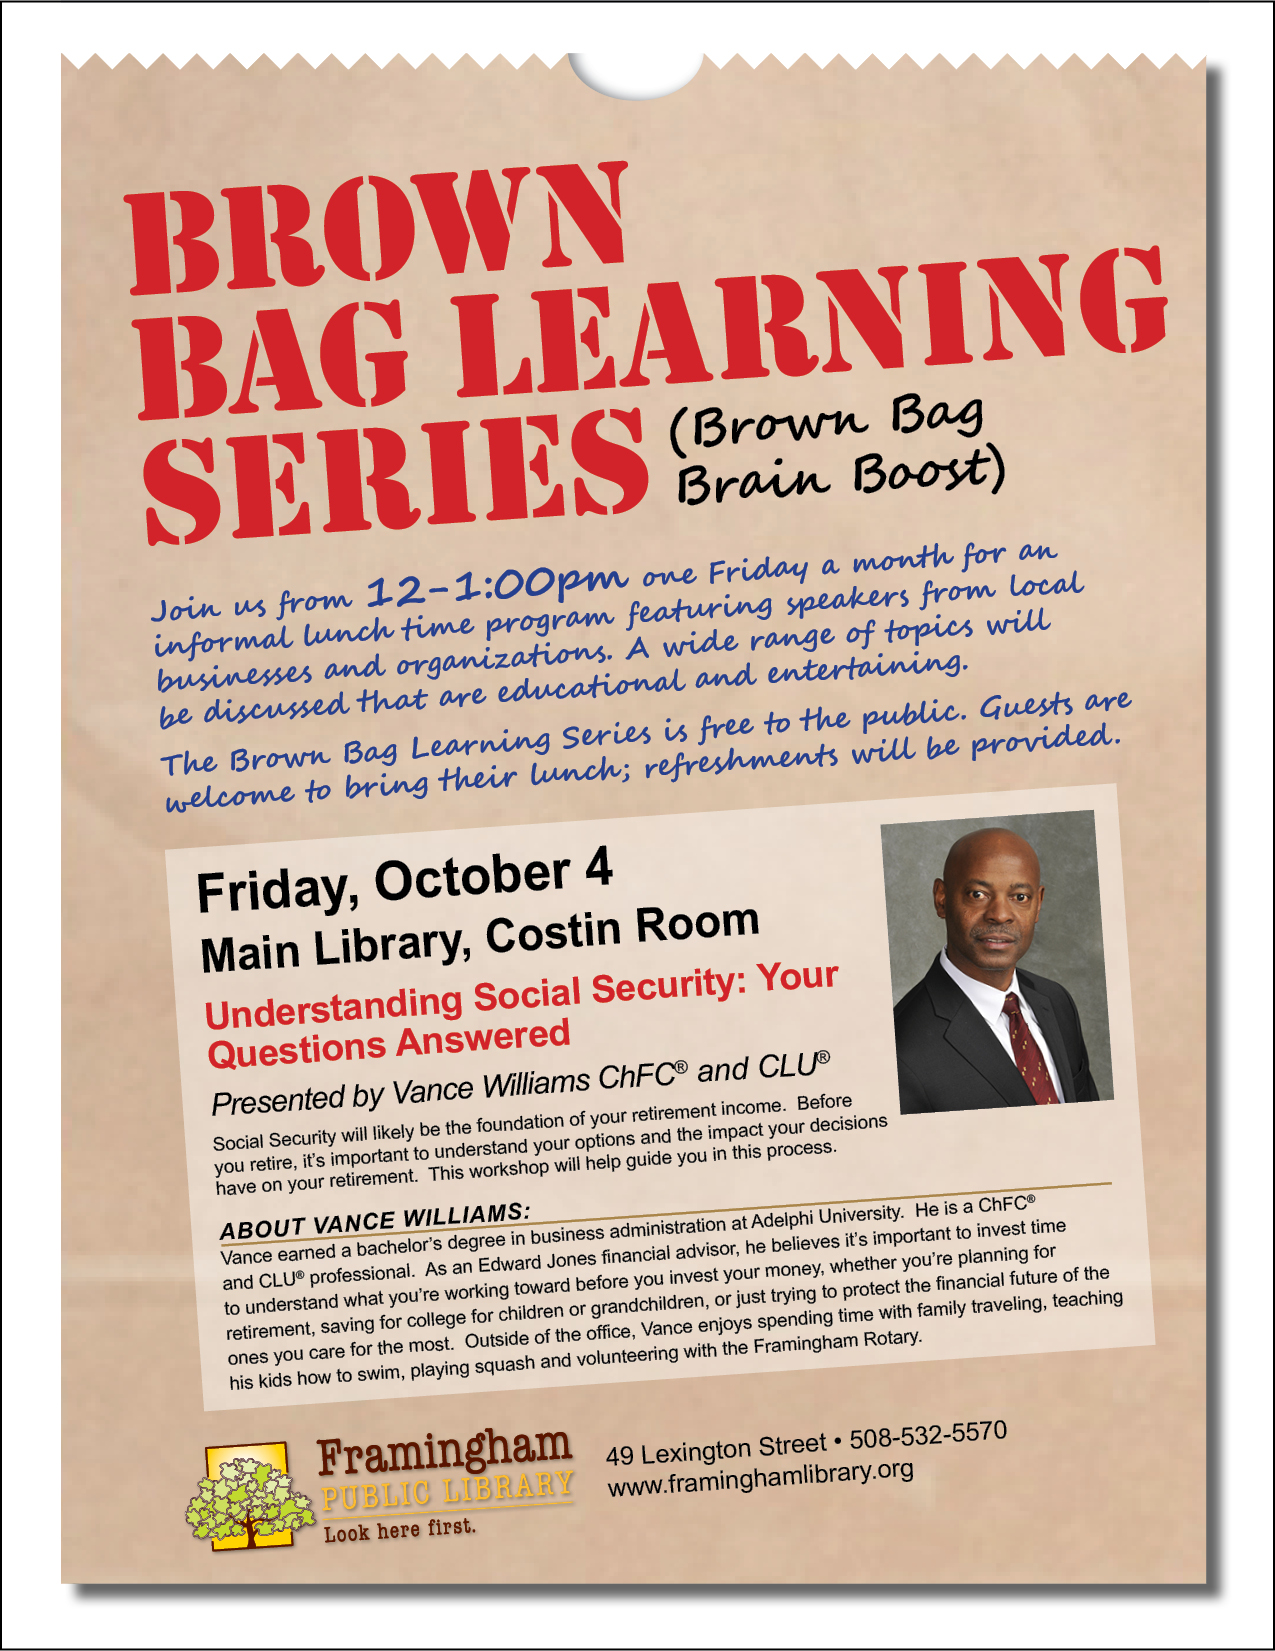 Brown Bag Learning Series: Understanding Social Security: Your Questions Answered thumbnail Photo